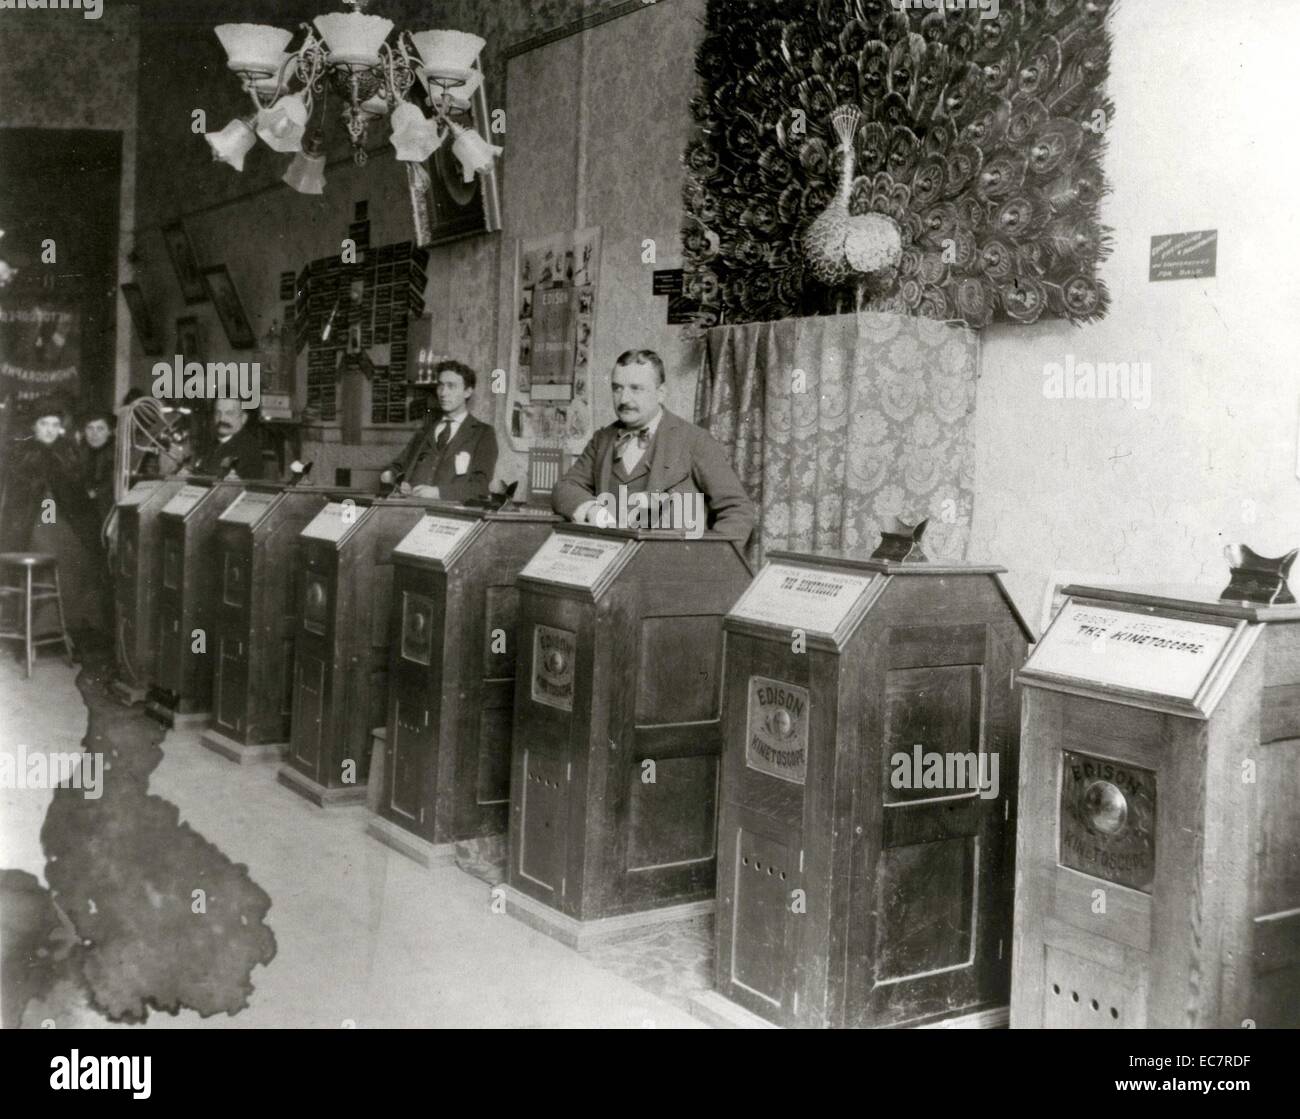 Albert Einstein's 'Peep Show' Kinetoscope Arcade. The kinetoscope was an early motion picture exhibition device that allowed films to be viewed by one person at a time through a peephole viewer window on top. This was the basic model for later movie projections. Stock Photo